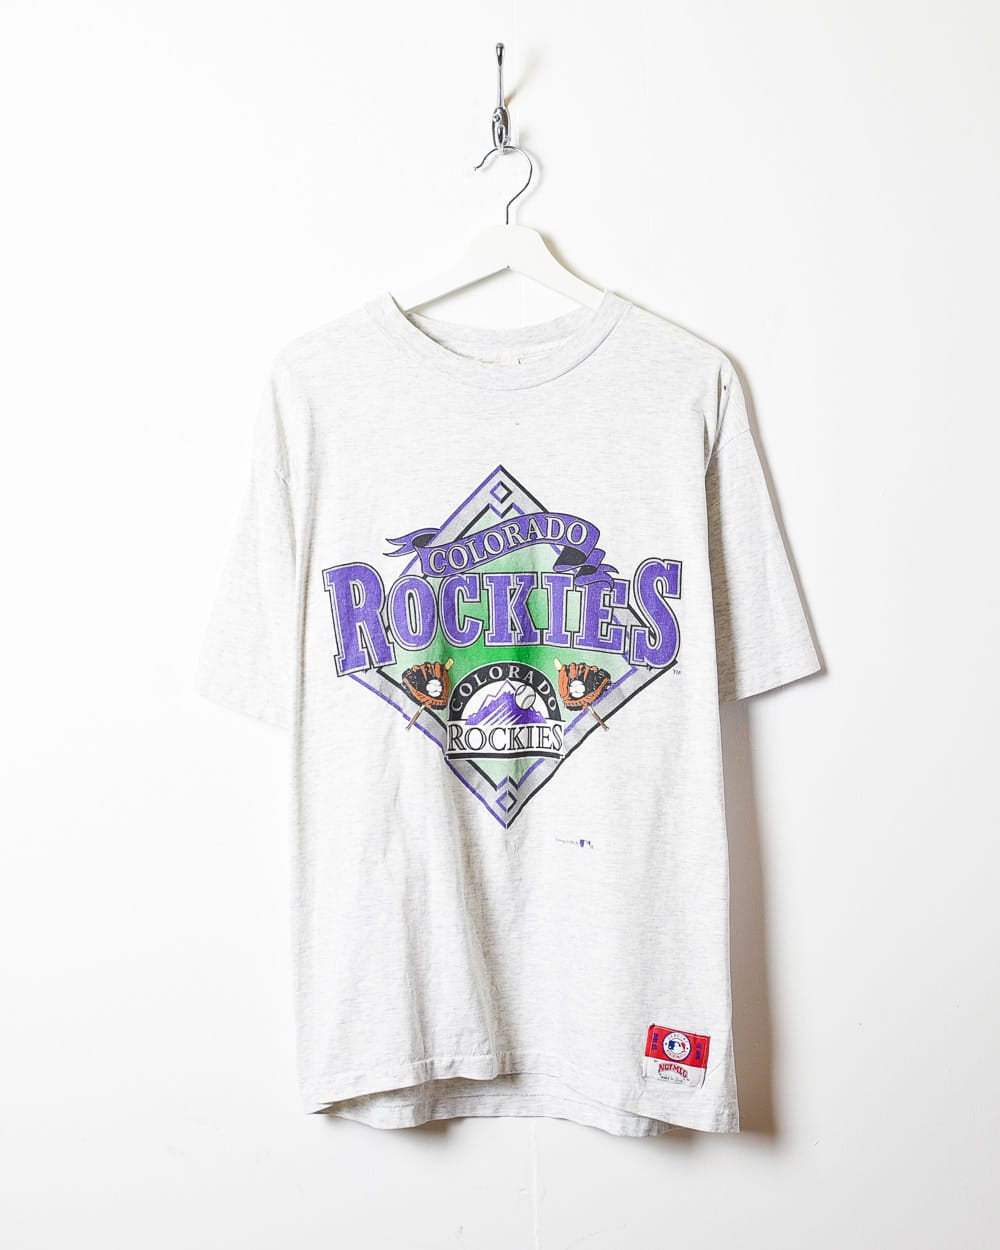 Vintage 1993 Colorado Rockies MLB hooded pull over. Made in the USA.